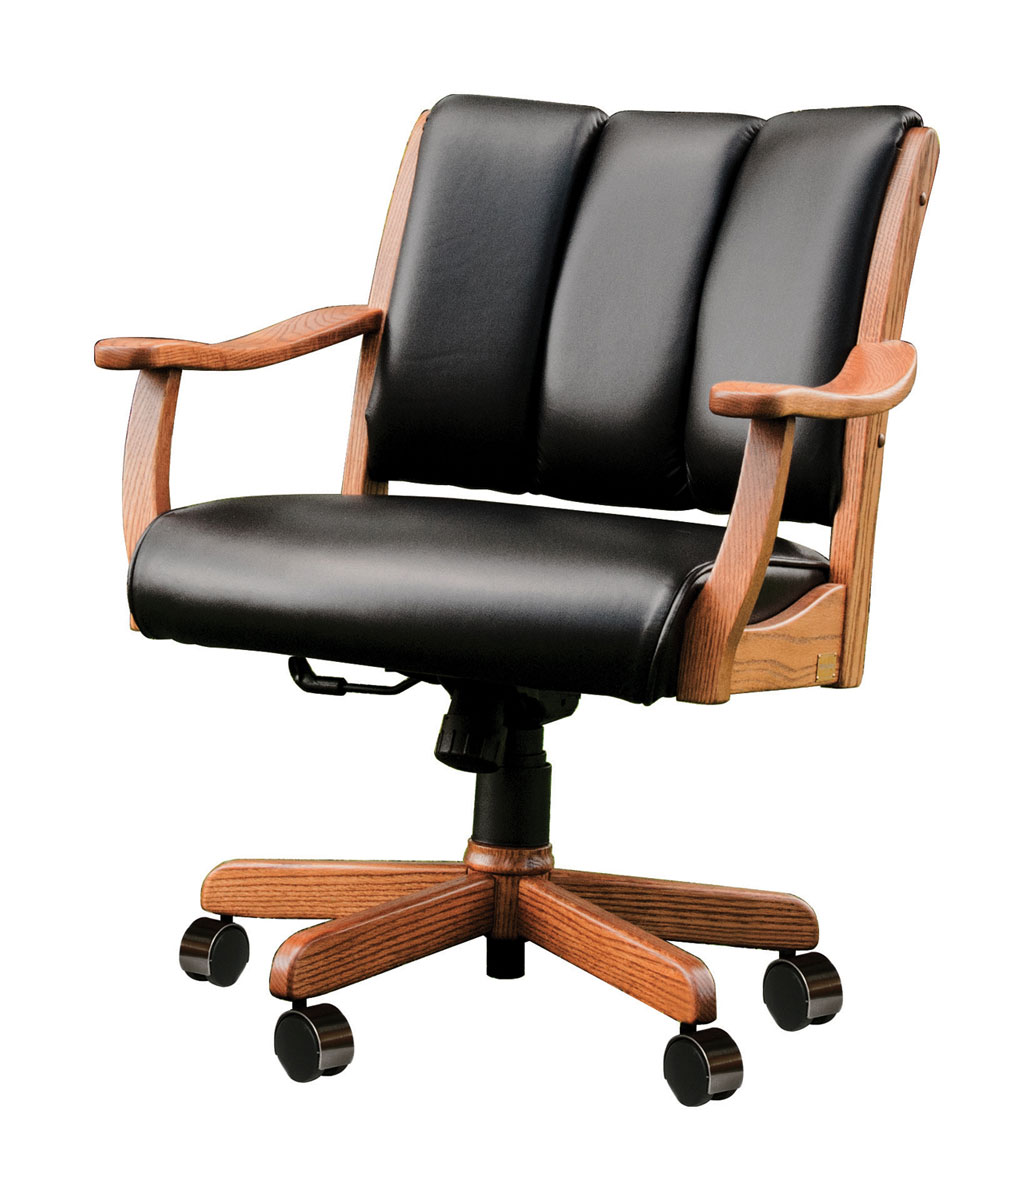 Midland Arm Chair with Gas Lift